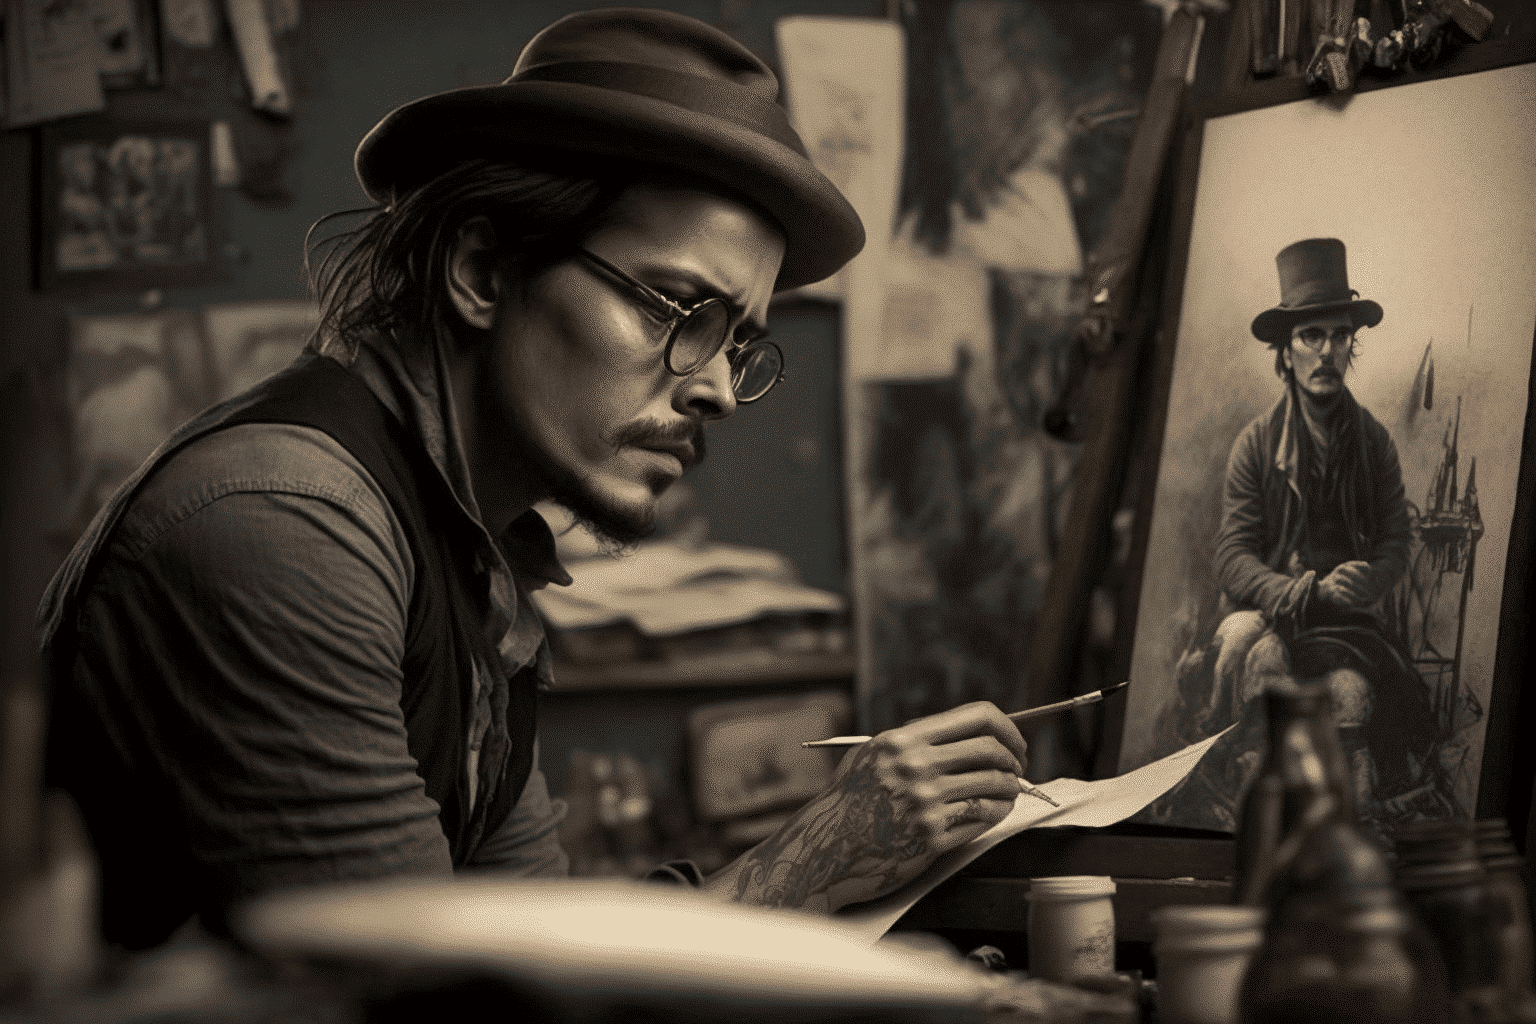 johnny-depp-turns-his-artistic-talent-into-painting-celebrities